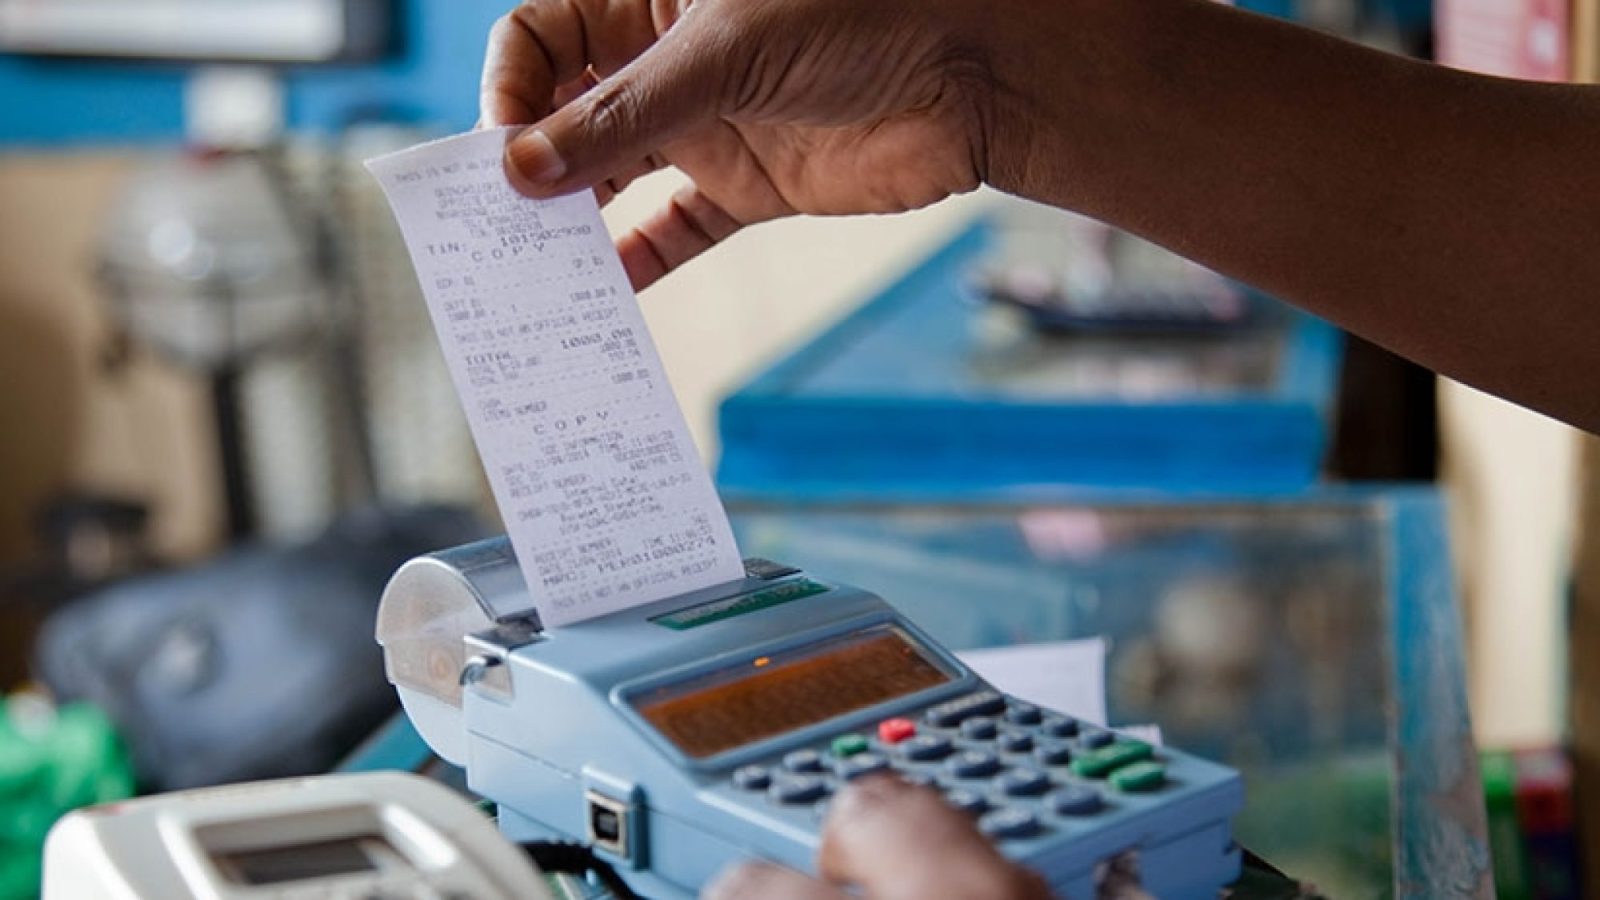 An image of a hand holding a receipt rolling out of an electronic cash register.